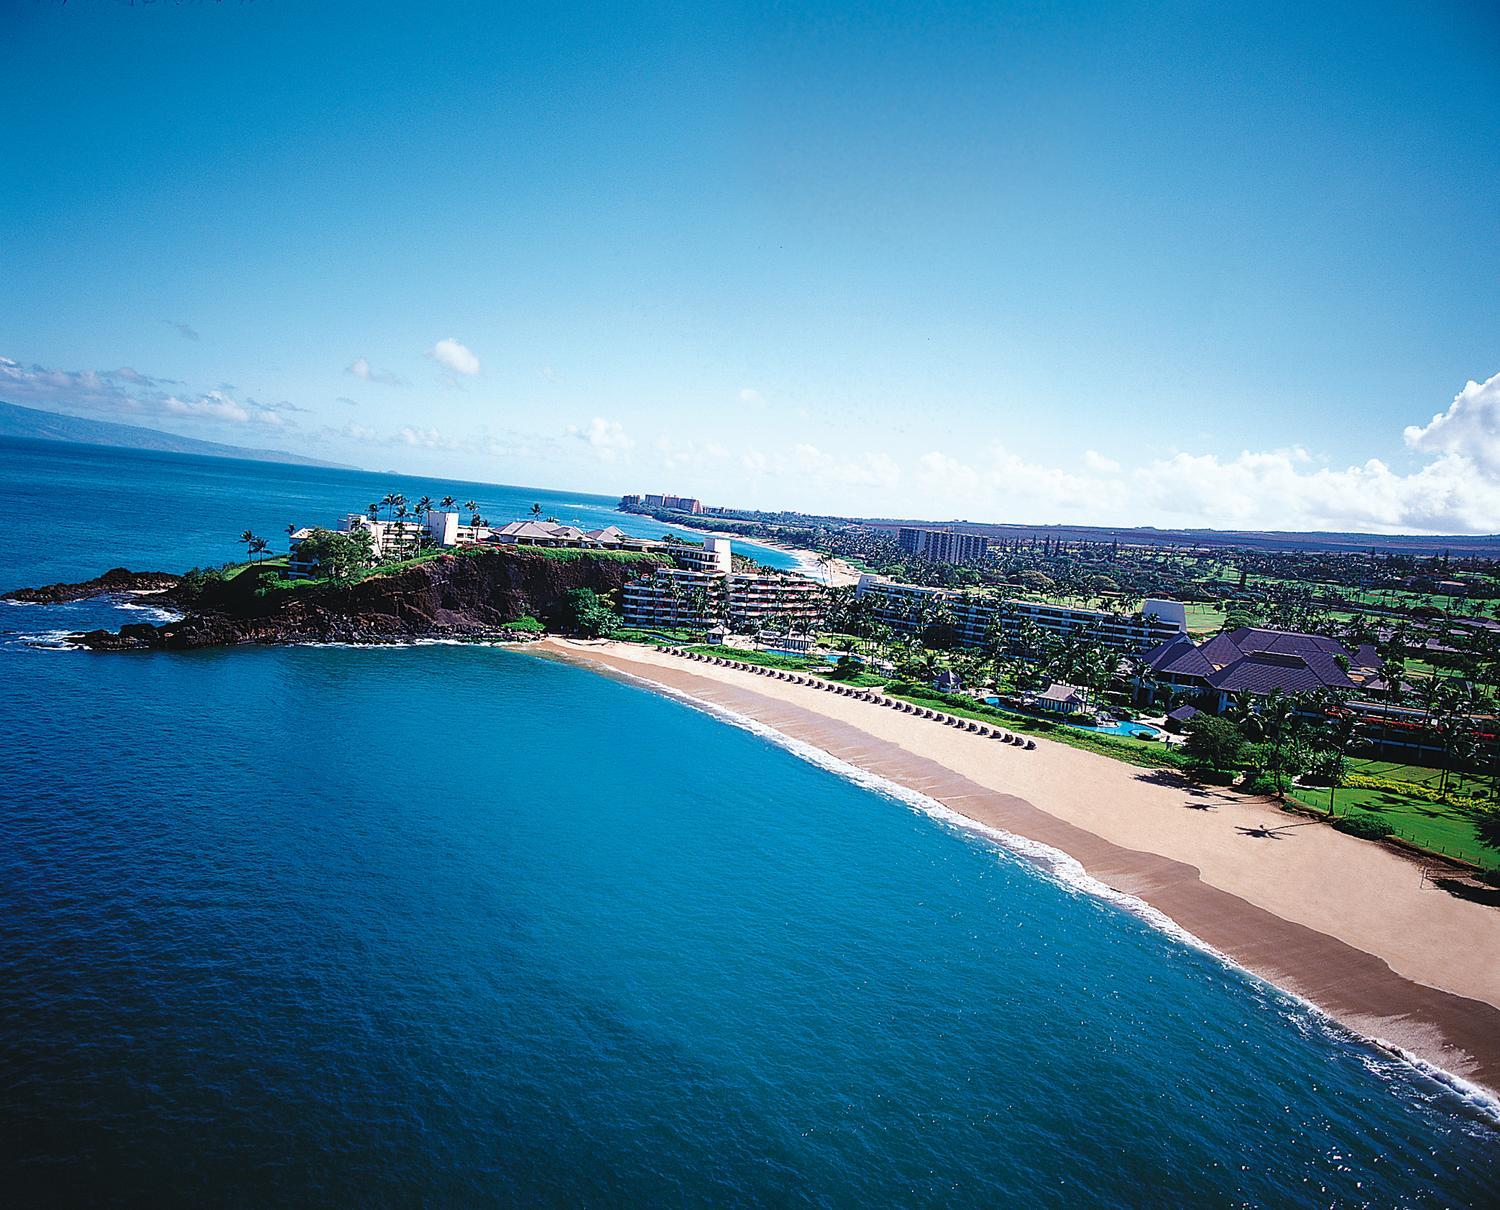 Niche Wallpaper Background: The Kaanapali Beach Picture